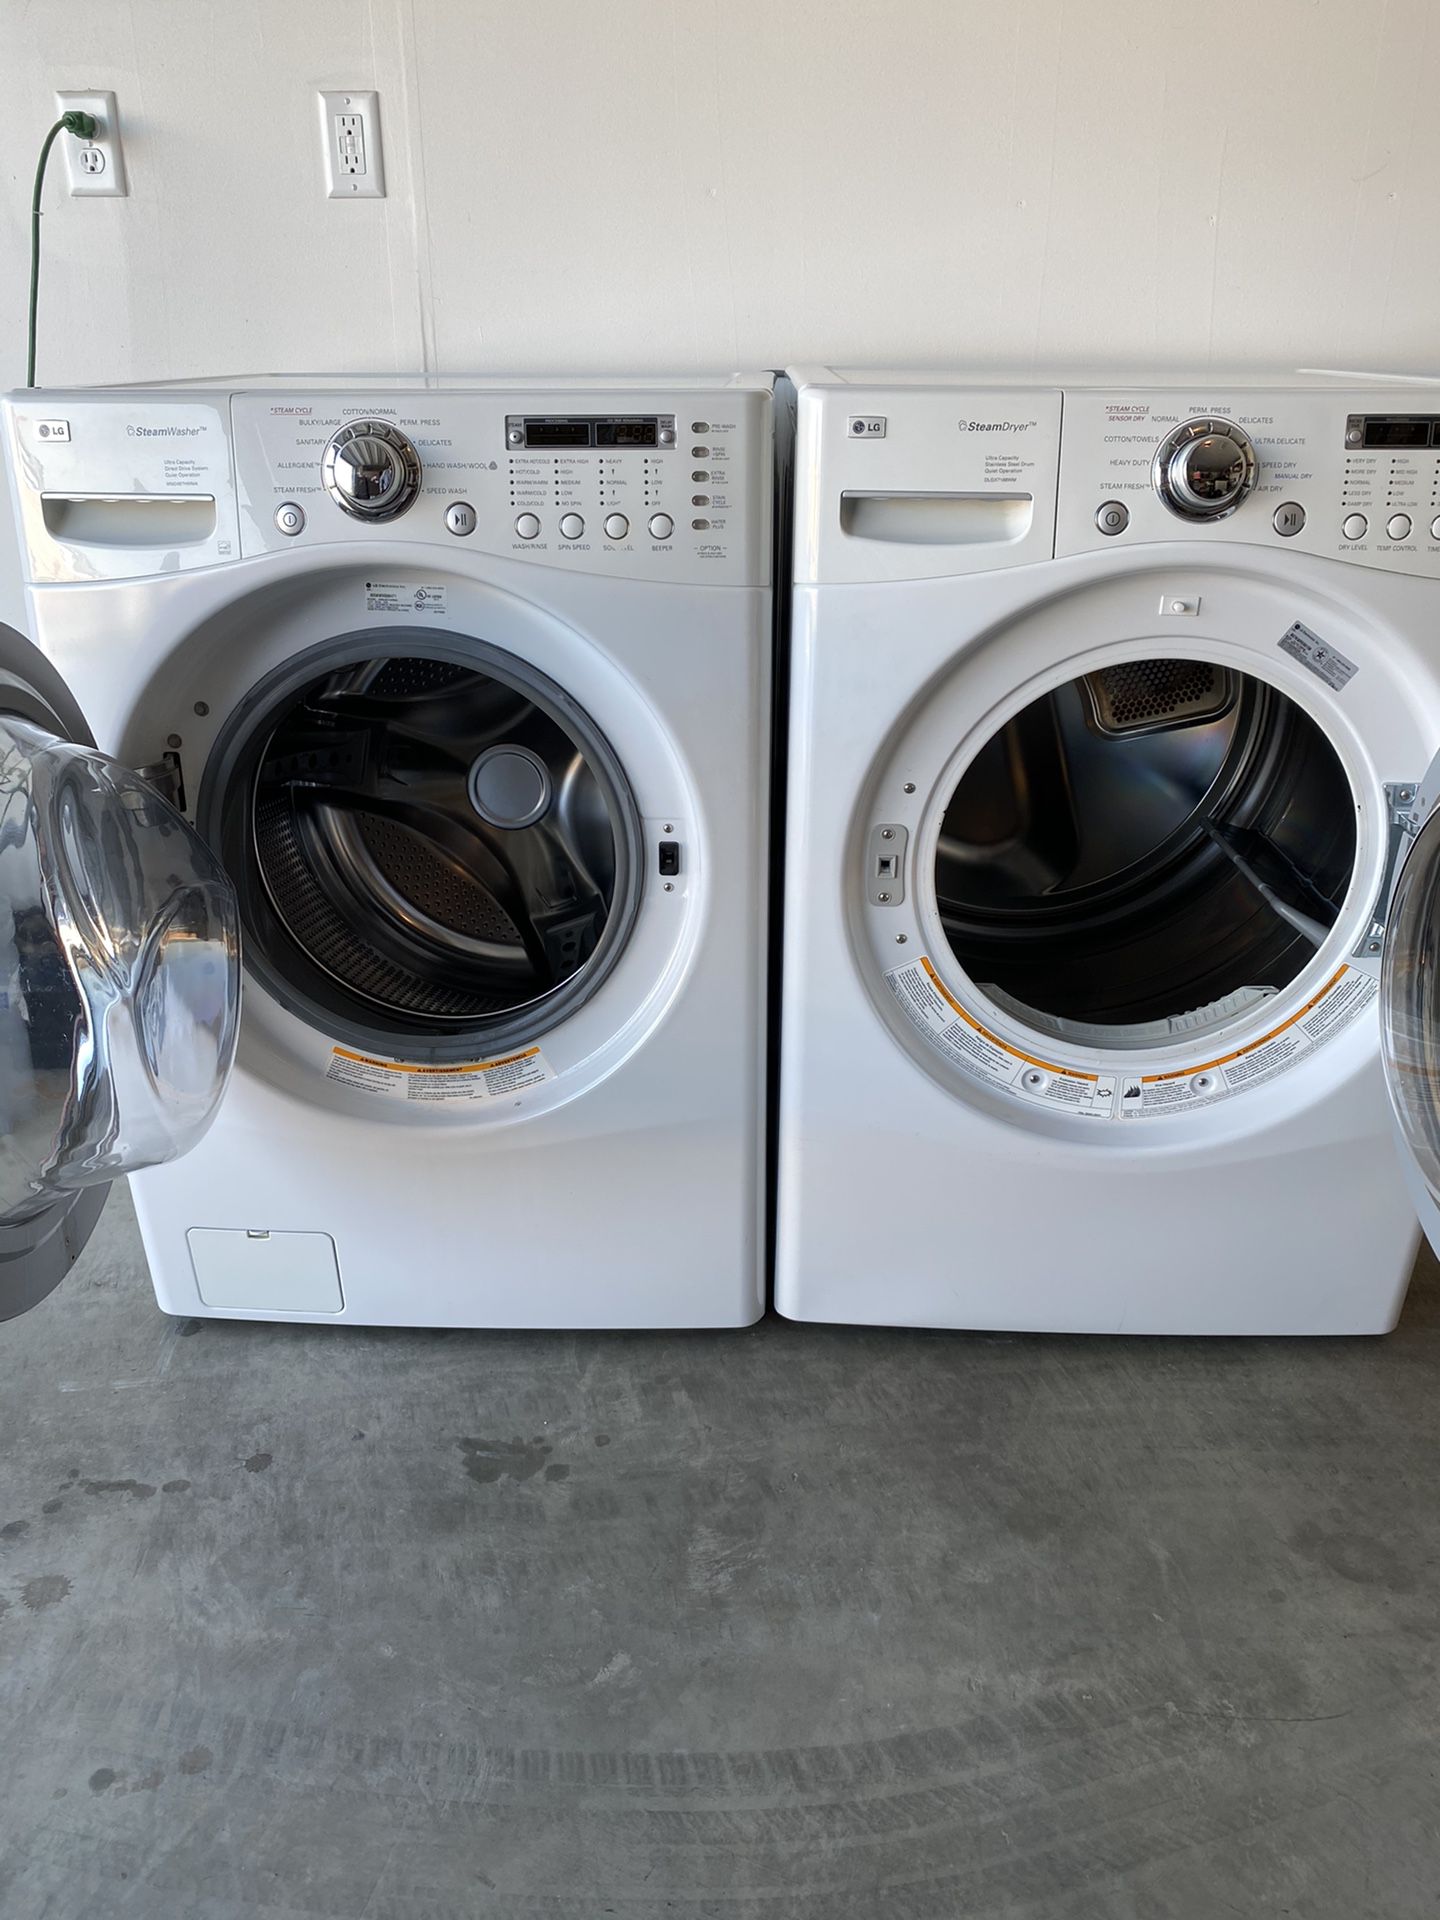 LG Front Load Washer And Gas Dryer in great working condition. All Needed connections are included. 27”W x 27.5”D x 39”H $550 Firm